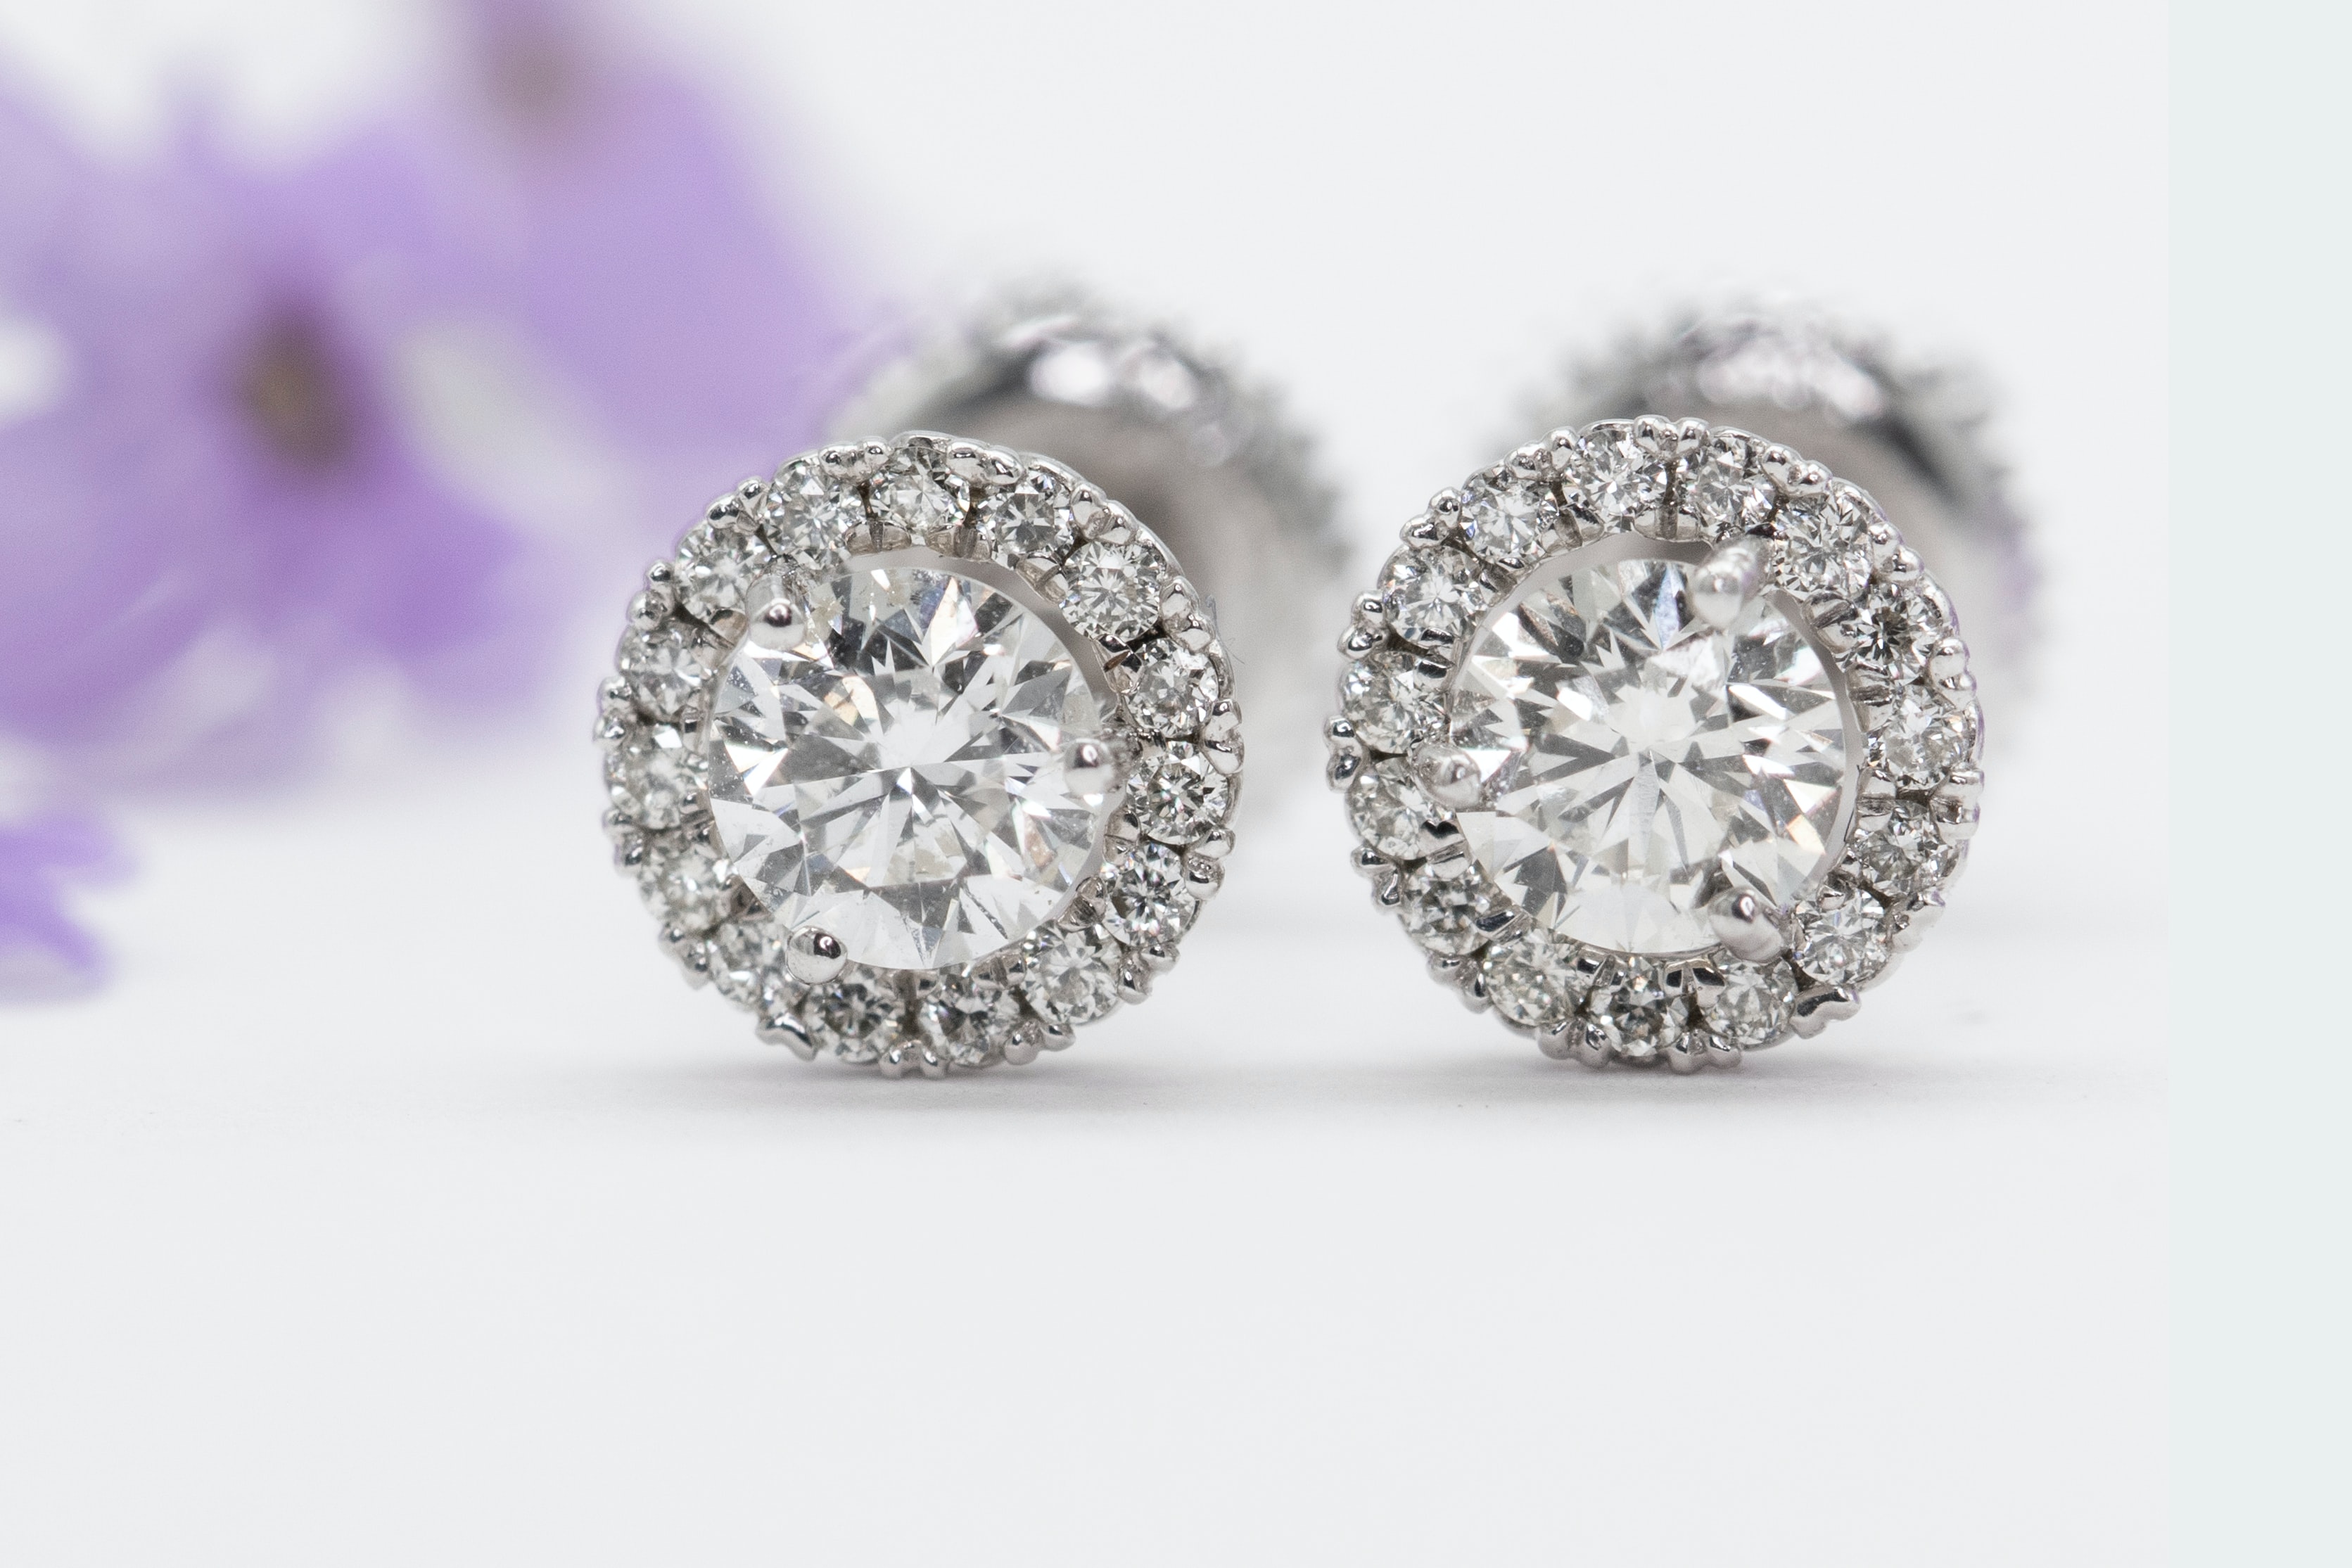 How To Build Your Own Diamond Studs